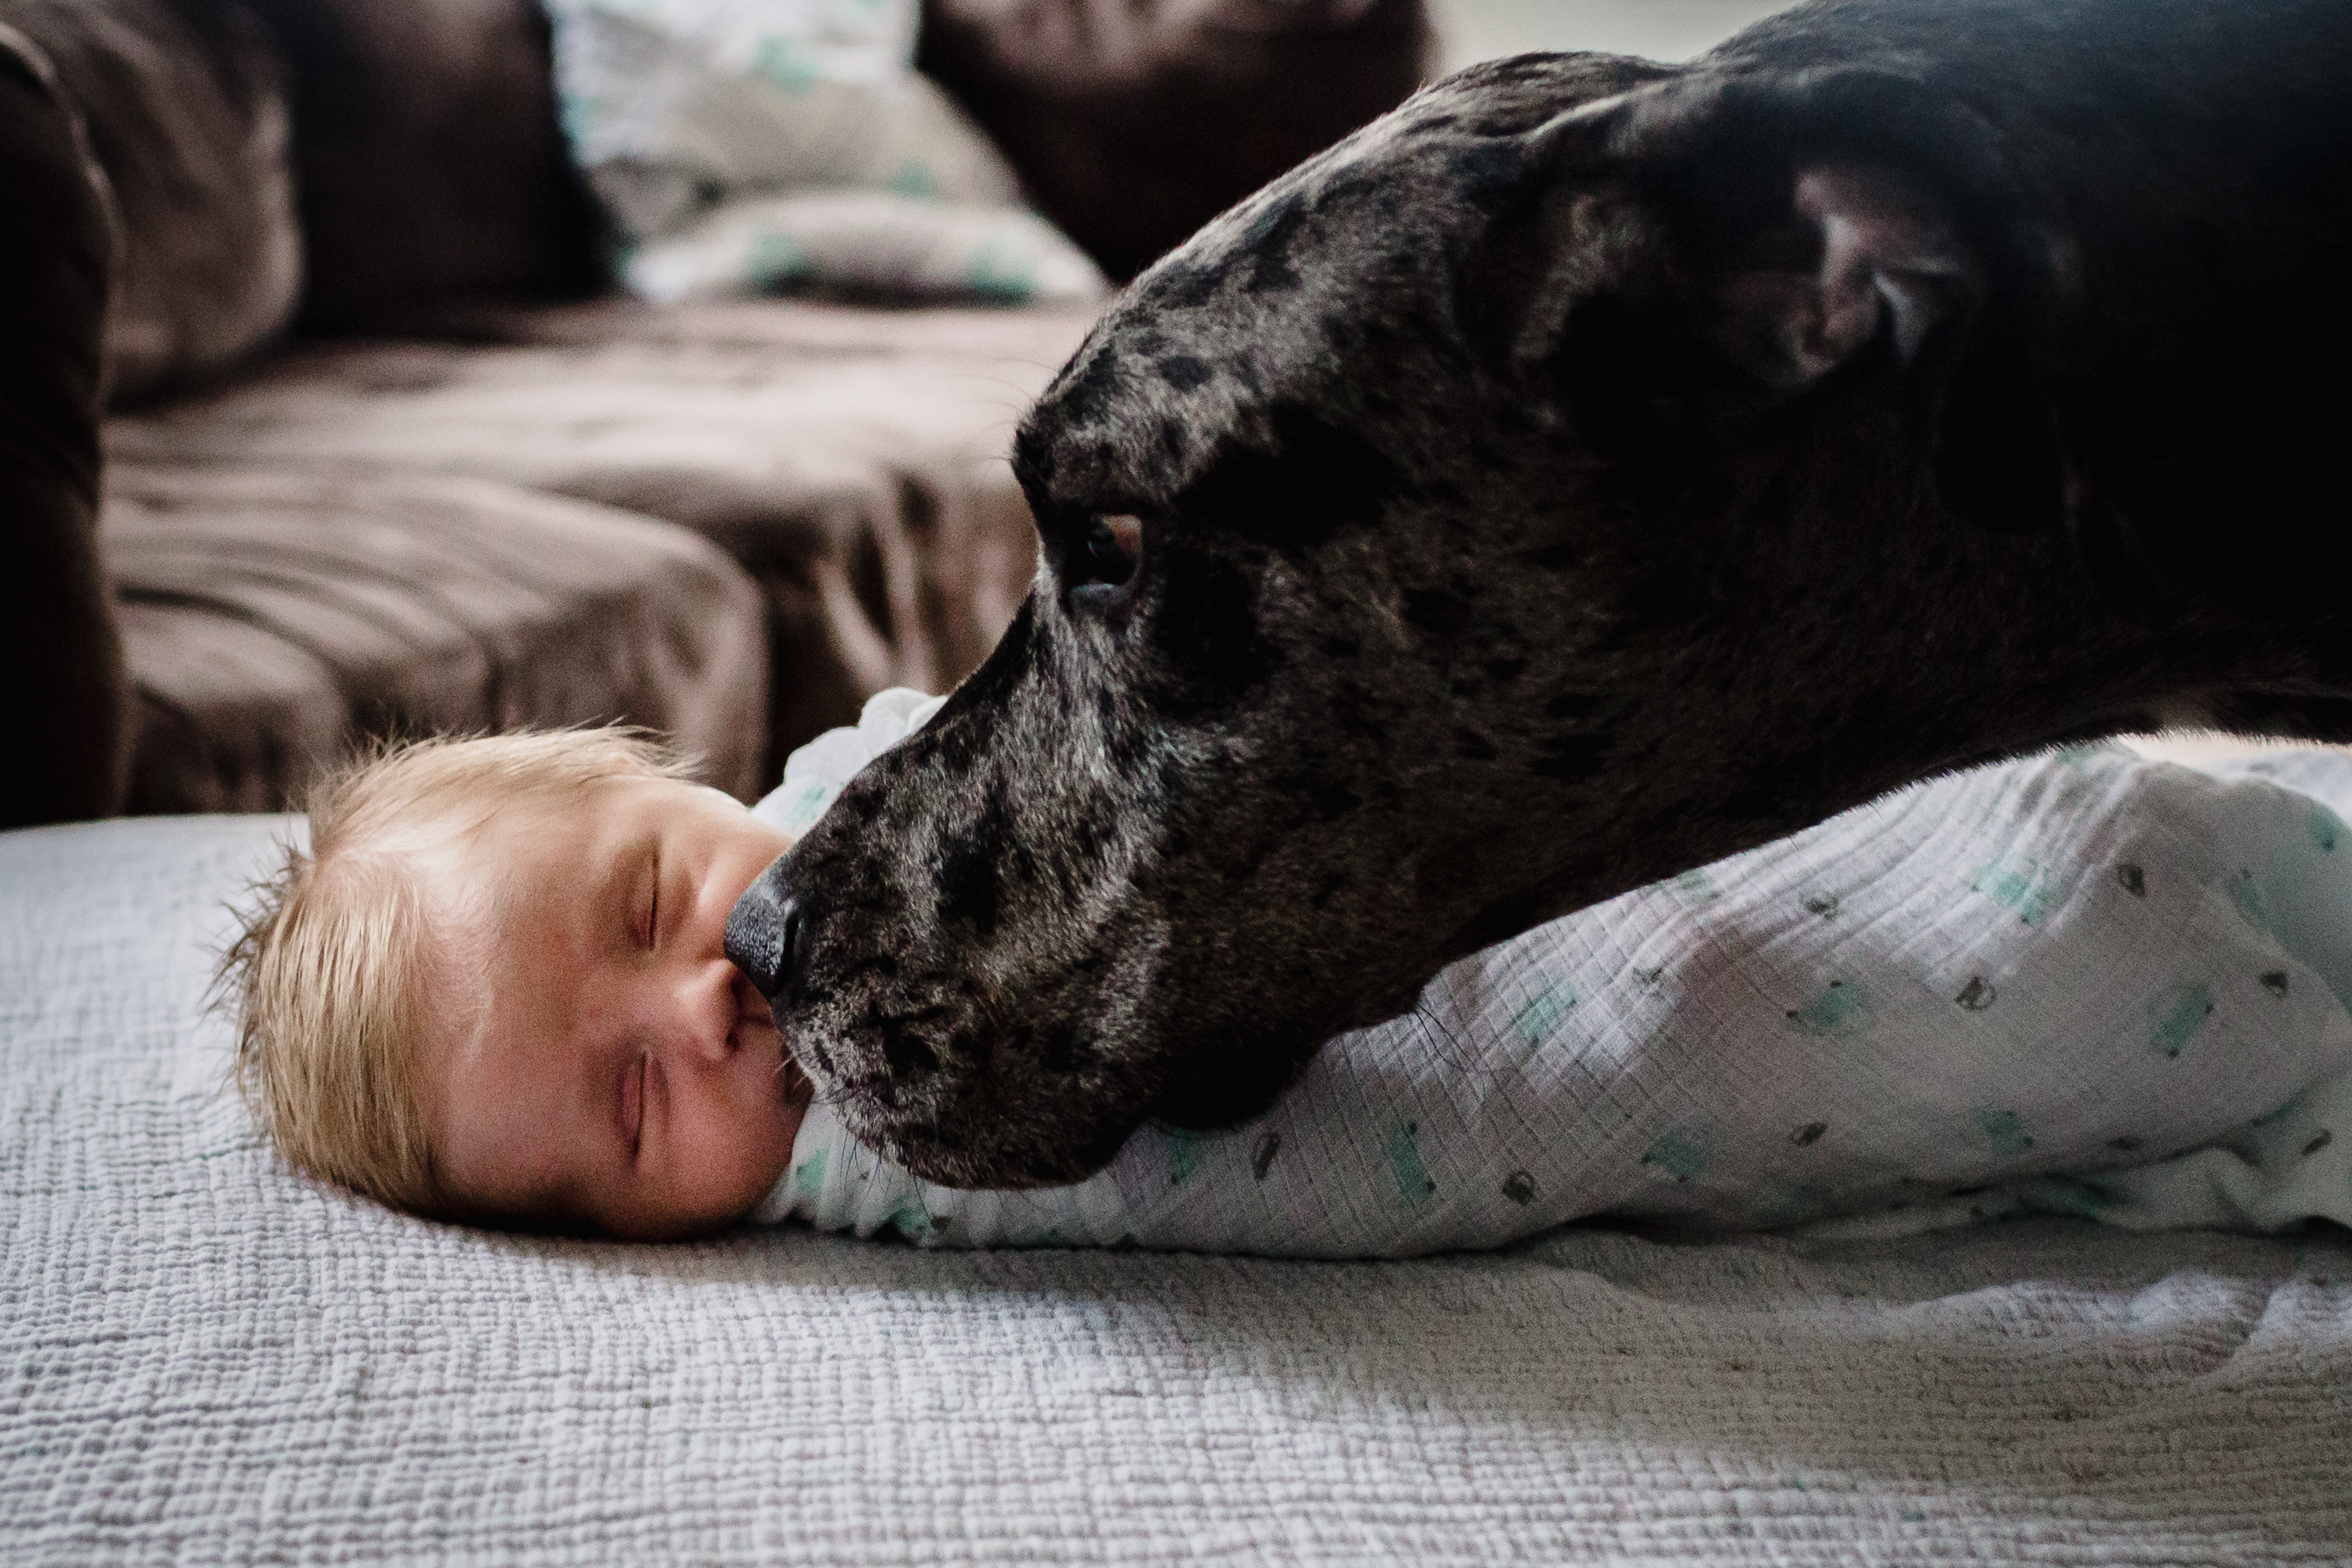 dog sniffing a newborn baby's face